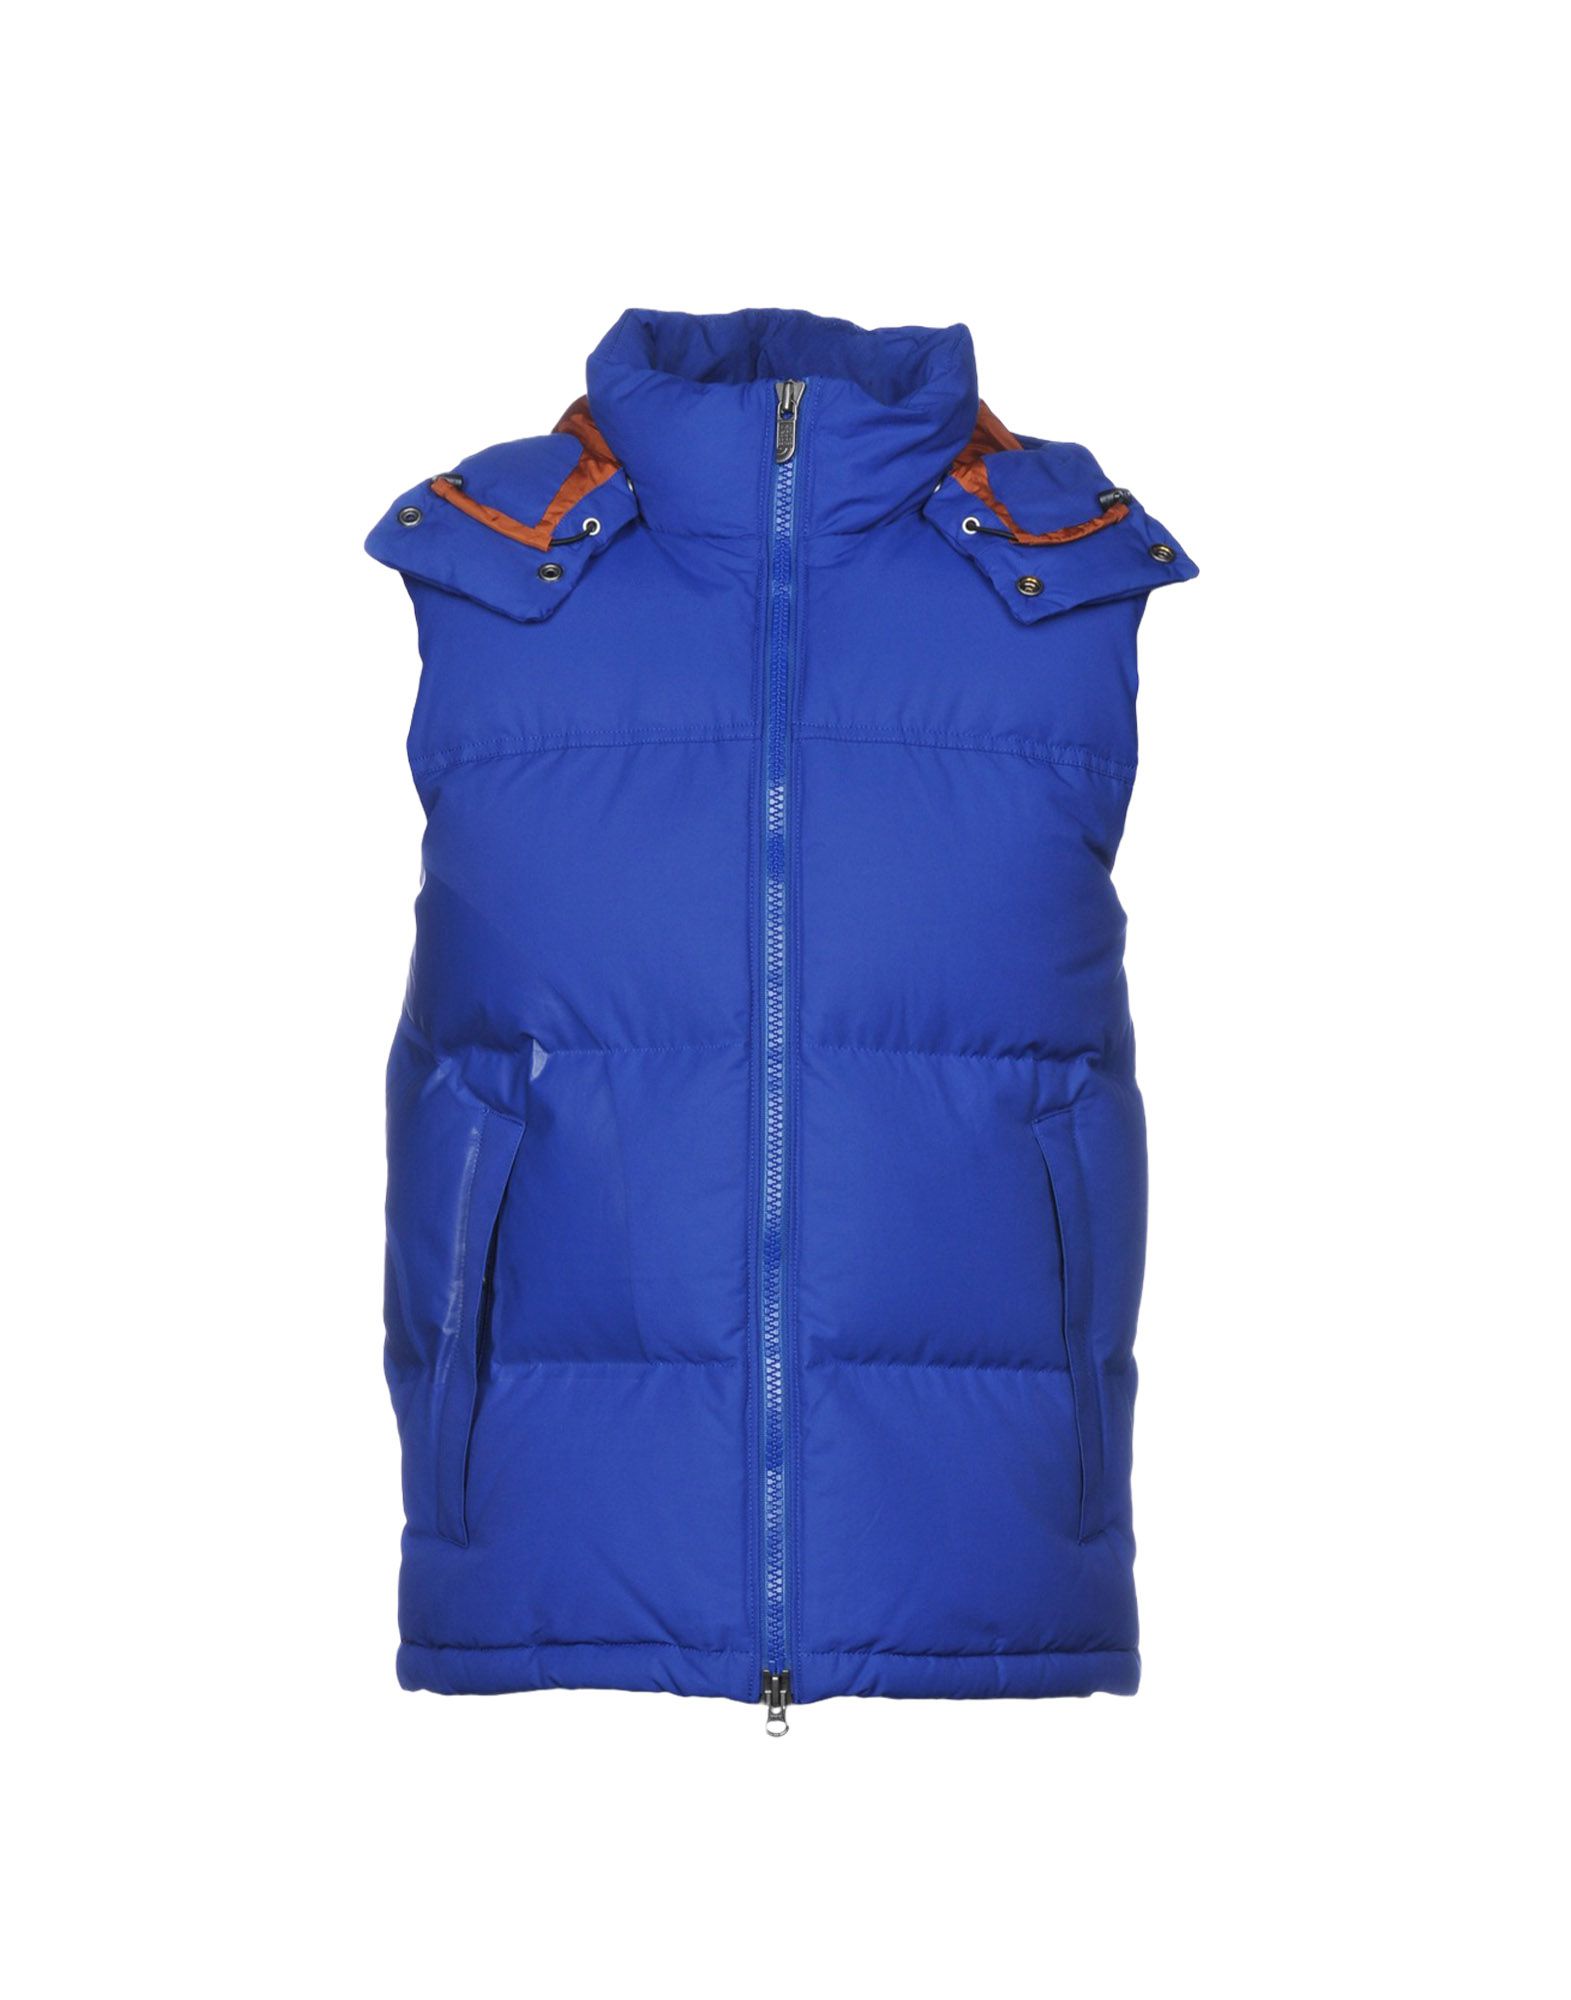 THE NORTH FACE Down jacket,41814421JE 6